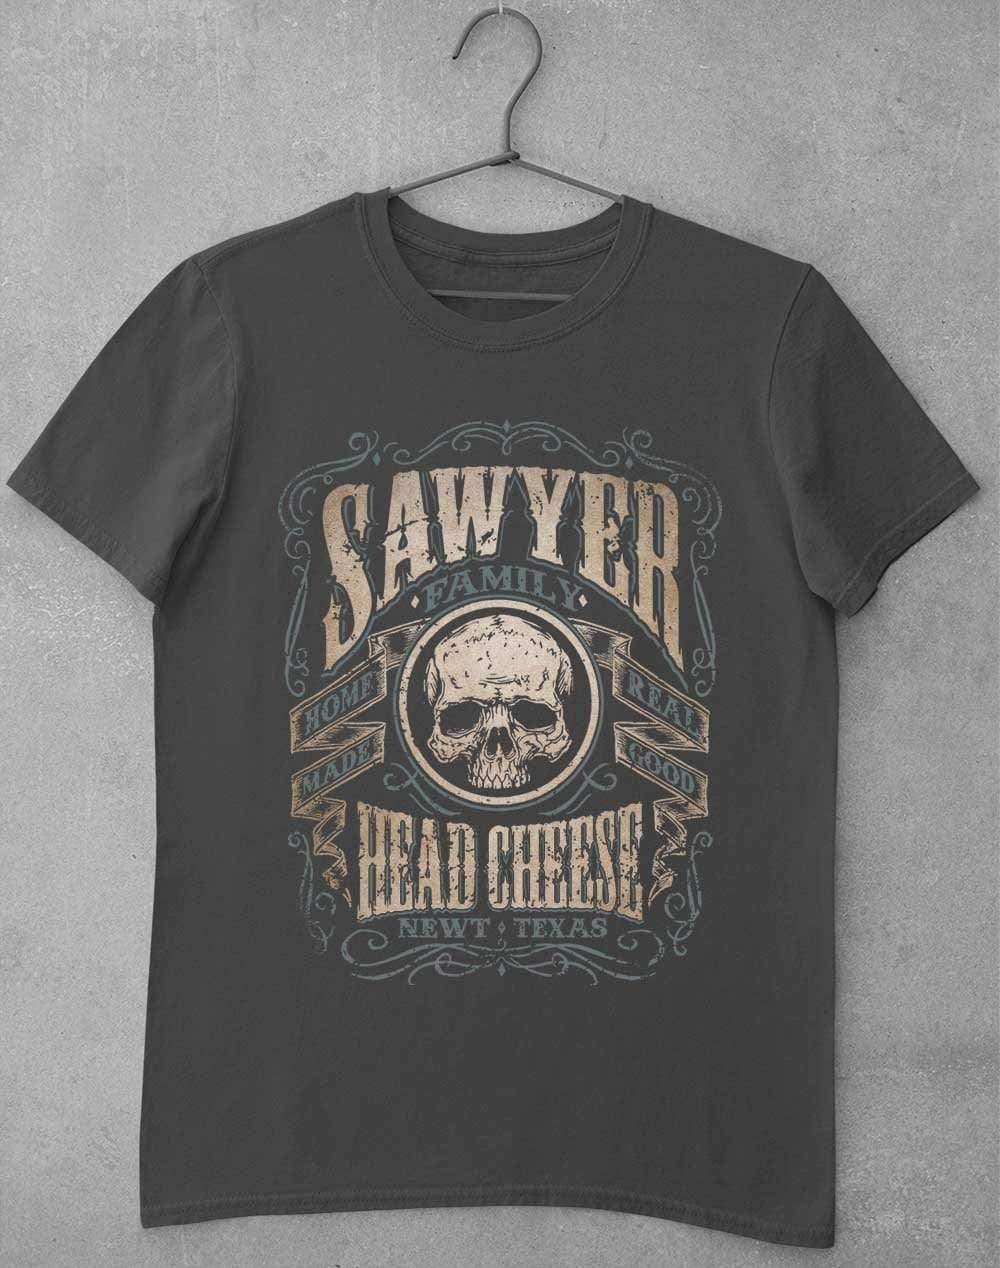 Sawyer Family Head Cheese T-Shirt S / Charcoal  - Off World Tees